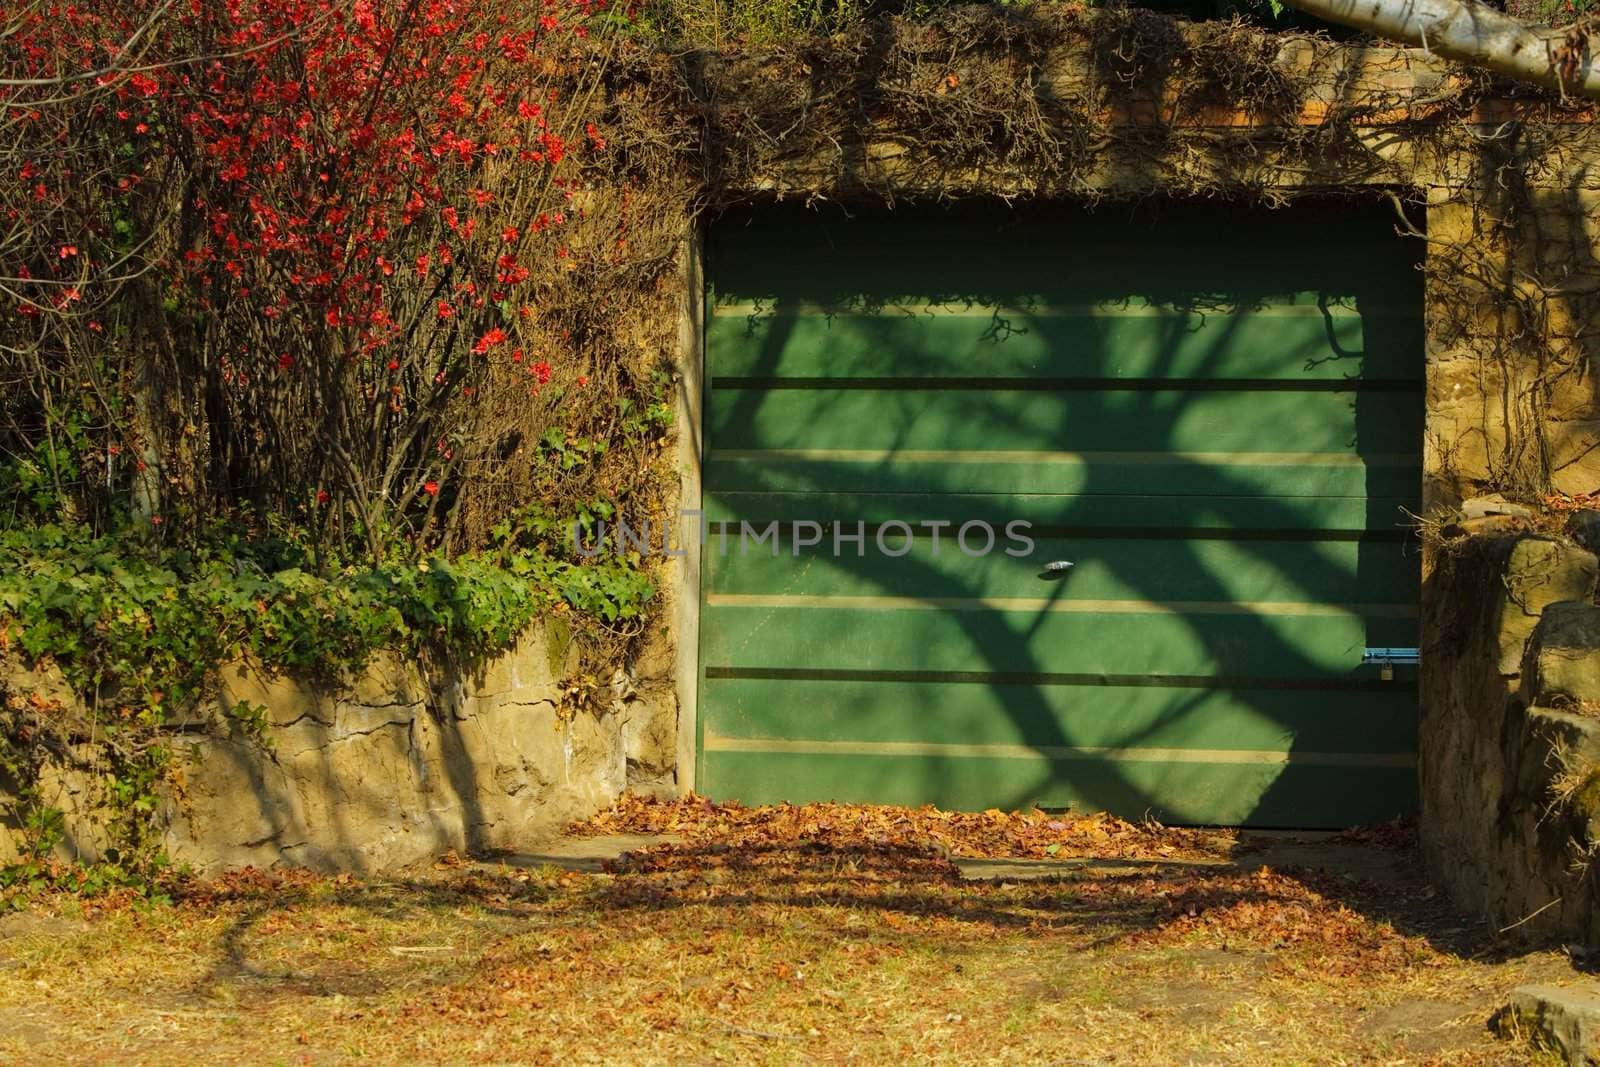 a modern green steel garage door in an old stone wall covered in autumn foliage.